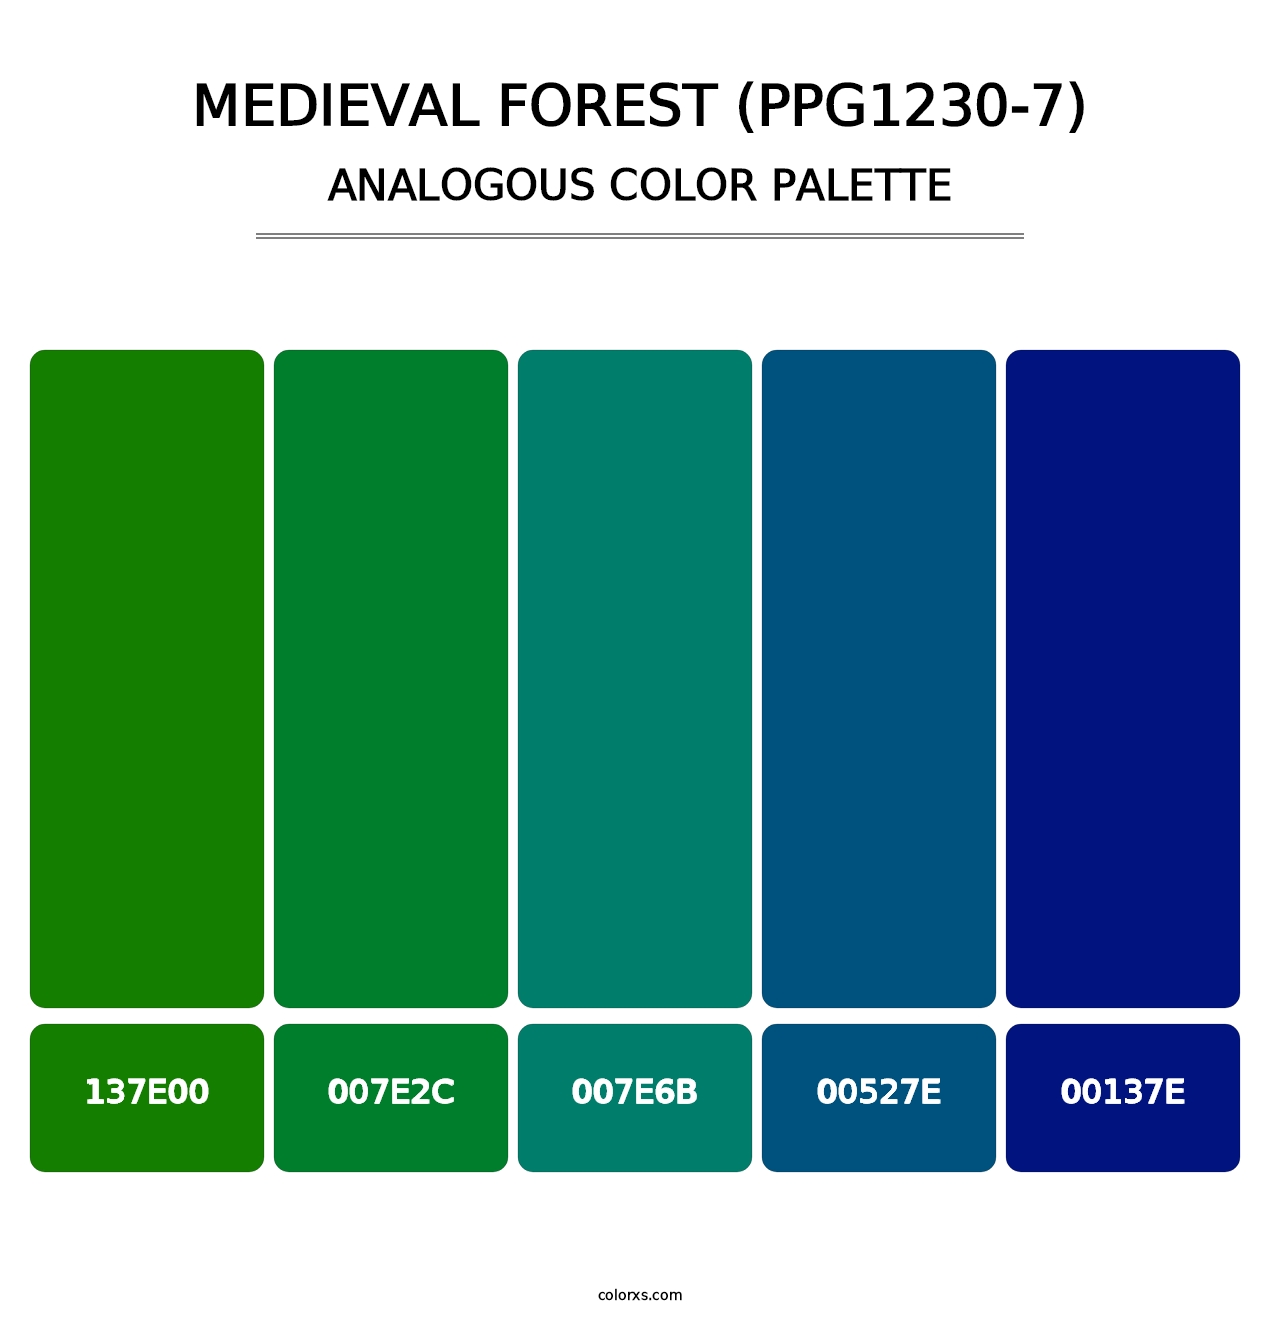 Medieval Forest (PPG1230-7) - Analogous Color Palette